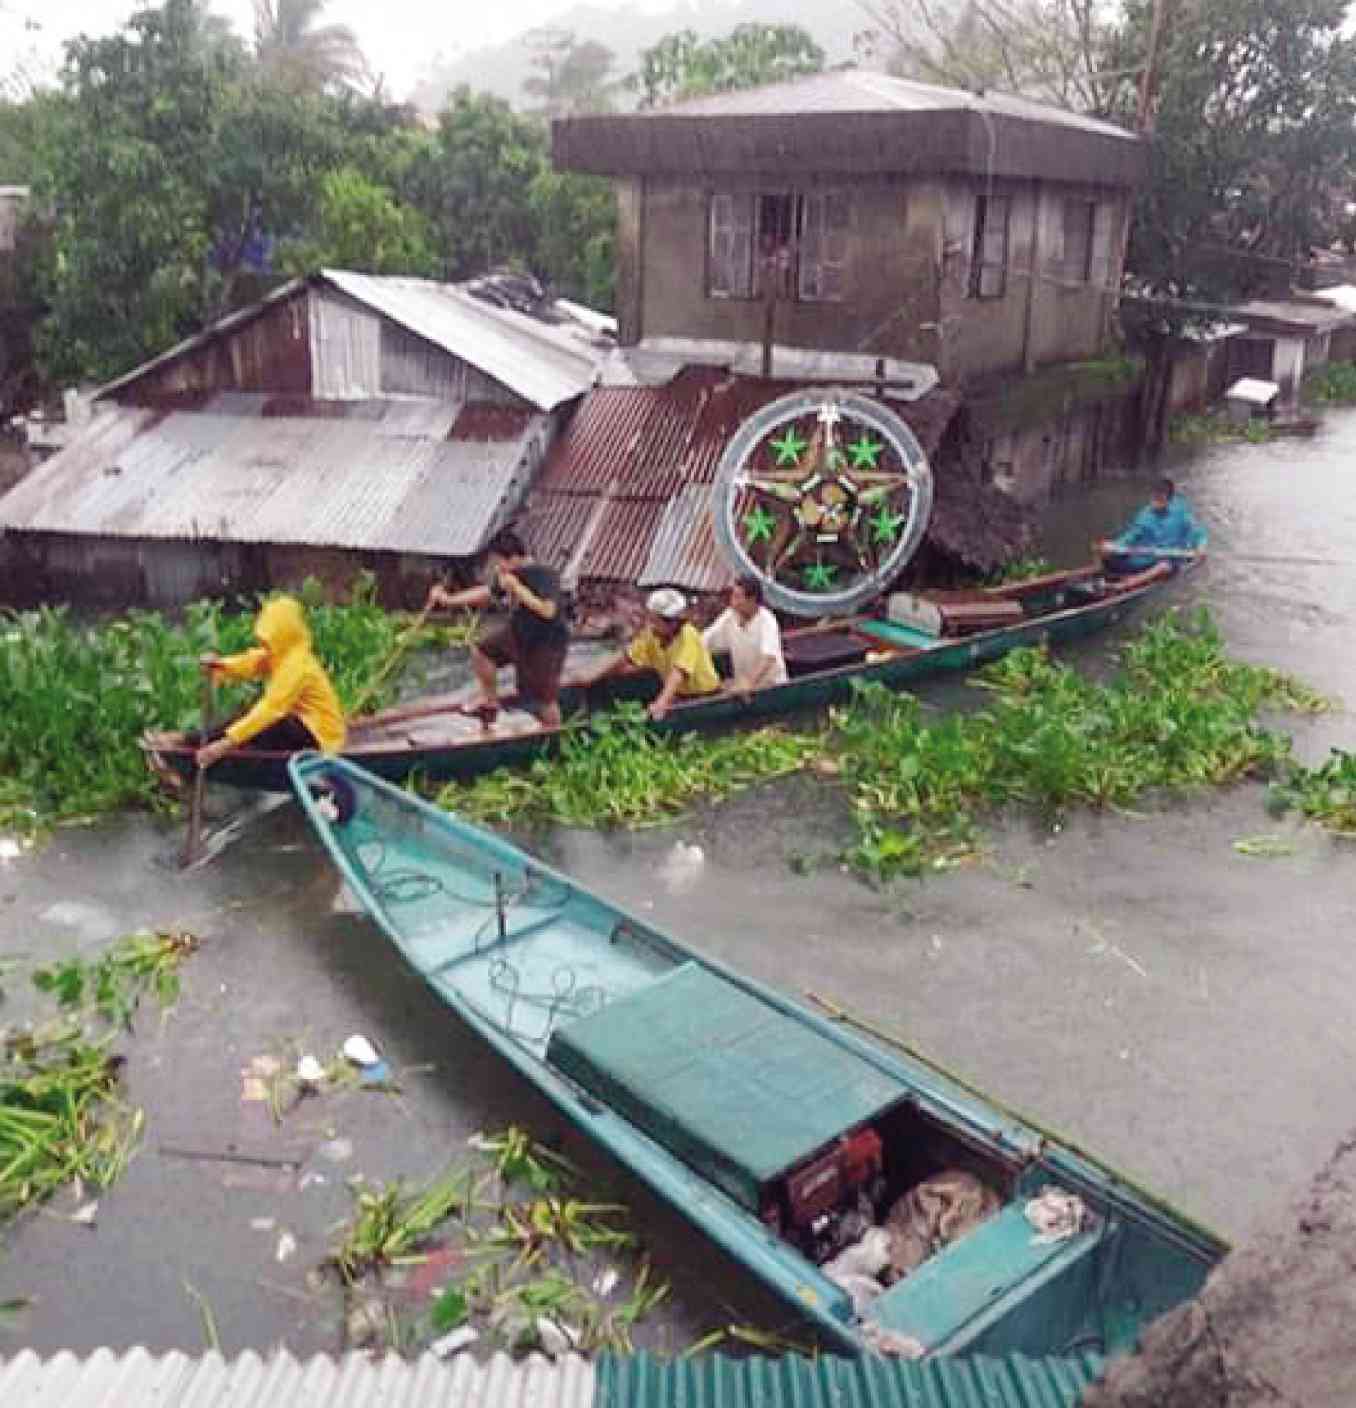 HOLIDAY TURNS TO HARDSHIP The people of Buhi, Camarines Sur, including residents who have adorned their homes with a Christmas star, may find little reason to celebrate on New Year’s Eve after rains dumped by Tropical Depression “Usman” left the town submerged in floodwaters. PHOTO COURTESY OF BUHI POLICE